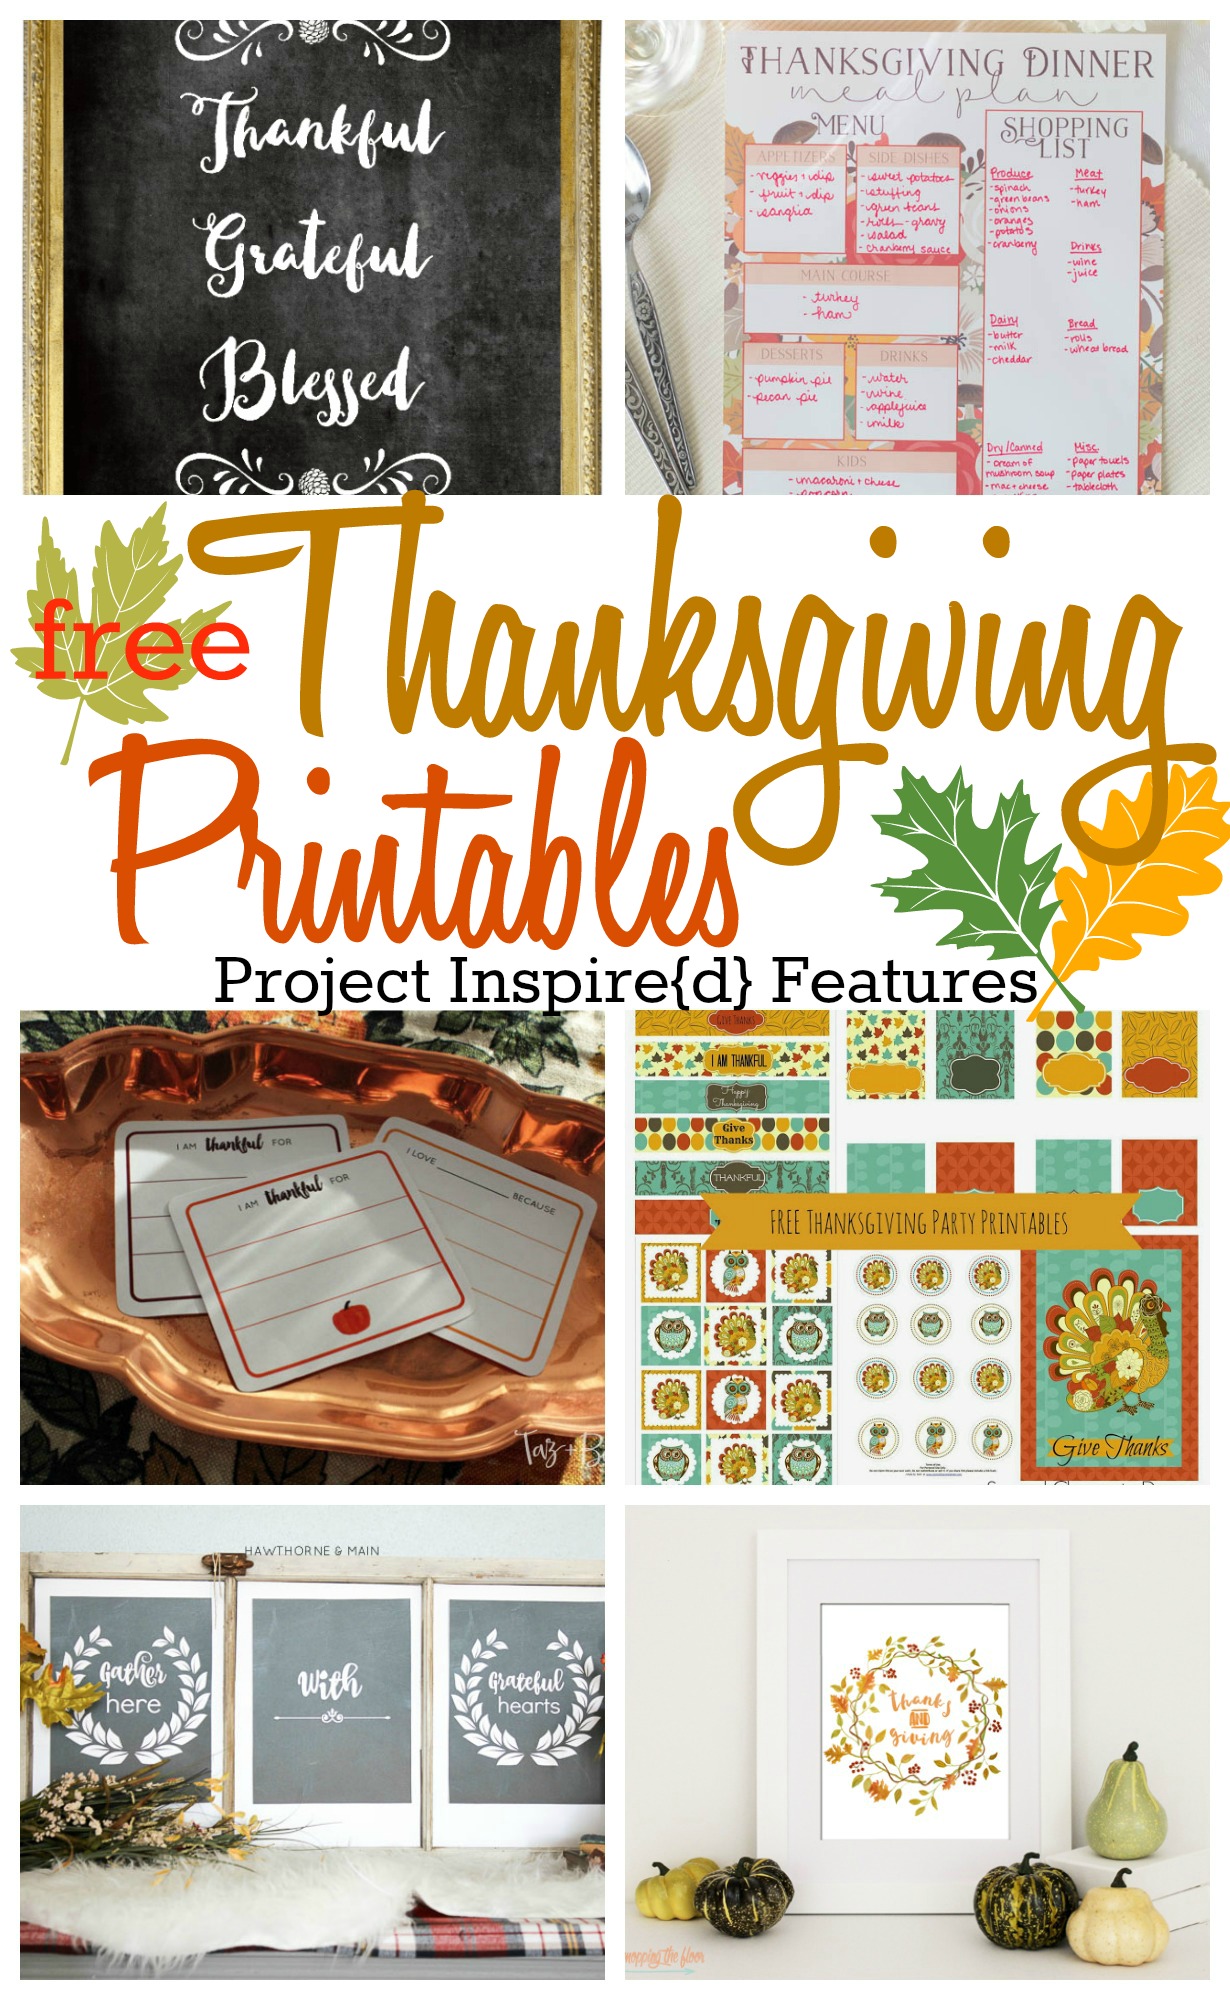 Six Free Thanksgiving Printables shared at Project Inspire{d}